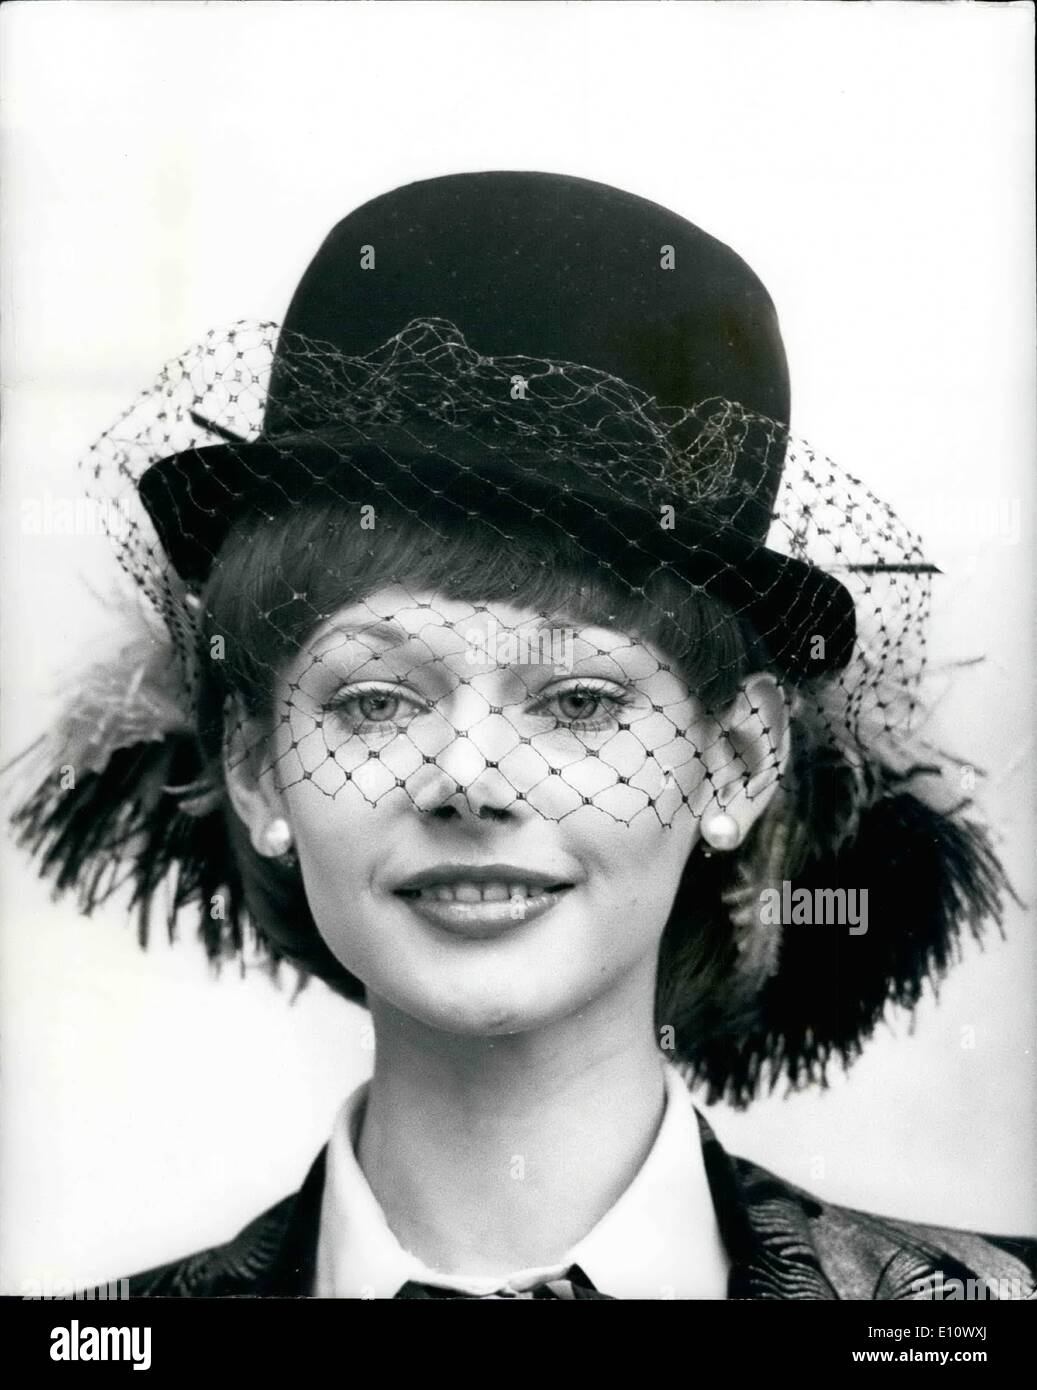 May 05, 1974 - Autumn Millinery Show: A Collection of Autumn millinery was shown in London today by The Millinery Guild. Photo Shows Model Clover wears a bowler in black velvet, with eye veil, and Ostrich trimming - by Norman Edwin. Stock Photo